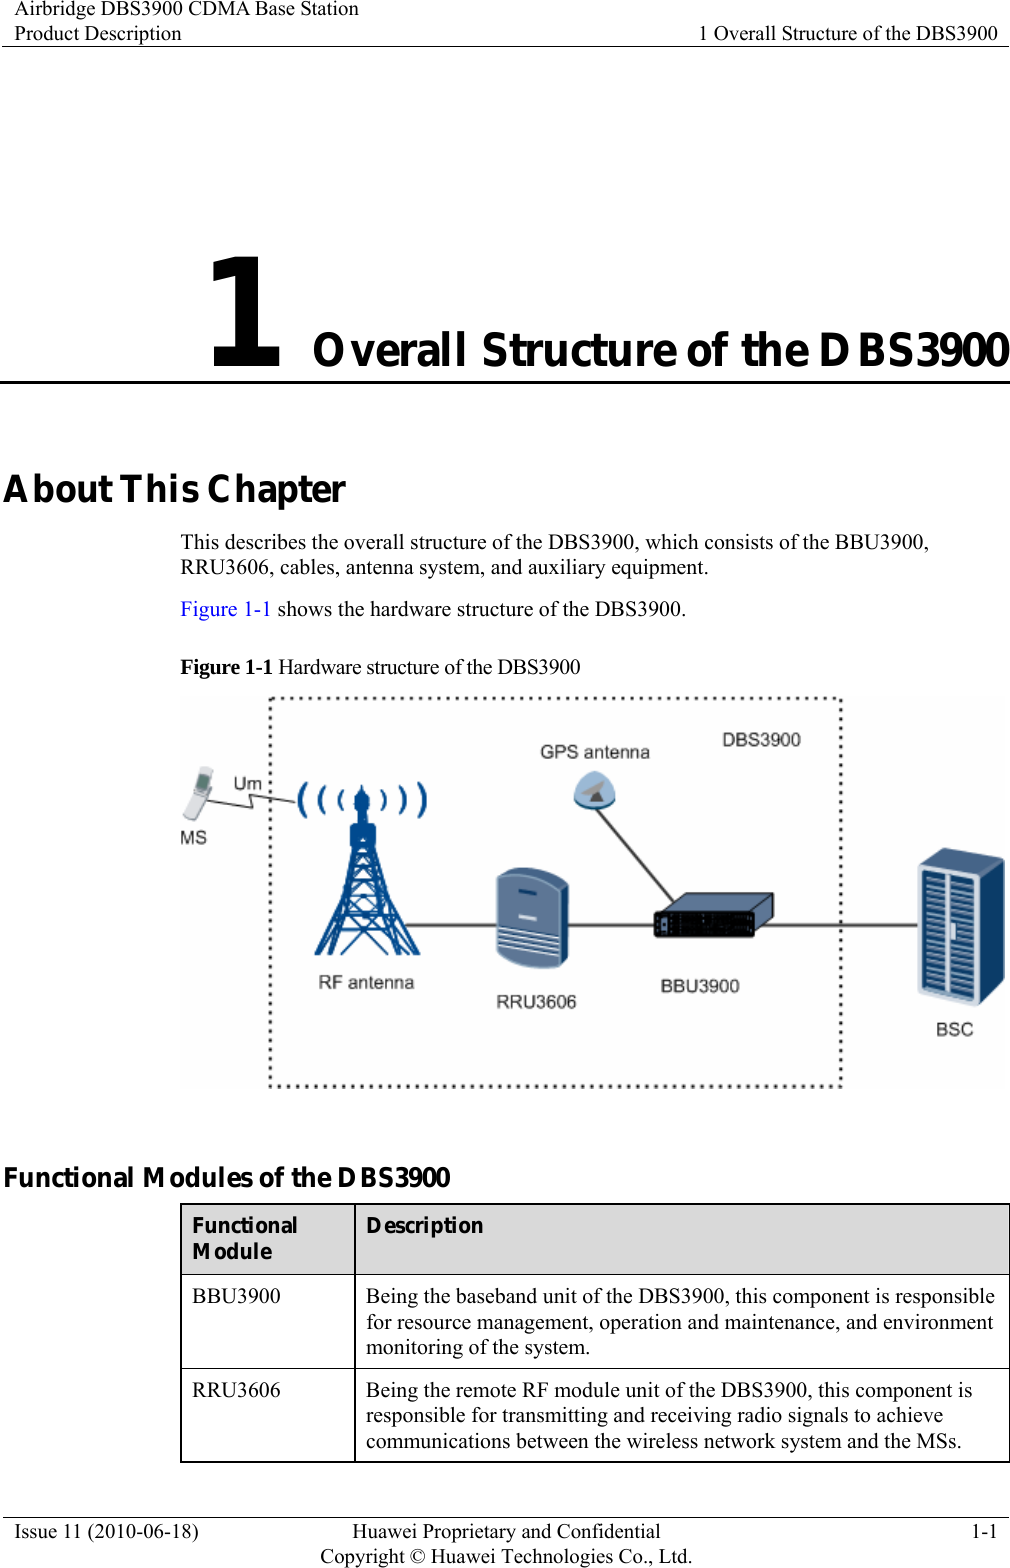 Airbridge DBS3900 CDMA Base Station Product Description  1 Overall Structure of the DBS3900 Issue 11 (2010-06-18)  Huawei Proprietary and Confidential         Copyright © Huawei Technologies Co., Ltd.1-1 1 Overall Structure of the DBS3900 About This Chapter This describes the overall structure of the DBS3900, which consists of the BBU3900, RRU3606, cables, antenna system, and auxiliary equipment. Figure 1-1 shows the hardware structure of the DBS3900. Figure 1-1 Hardware structure of the DBS3900   Functional Modules of the DBS3900 Functional Module  Description BBU3900  Being the baseband unit of the DBS3900, this component is responsible for resource management, operation and maintenance, and environment monitoring of the system. RRU3606  Being the remote RF module unit of the DBS3900, this component is responsible for transmitting and receiving radio signals to achieve communications between the wireless network system and the MSs. 